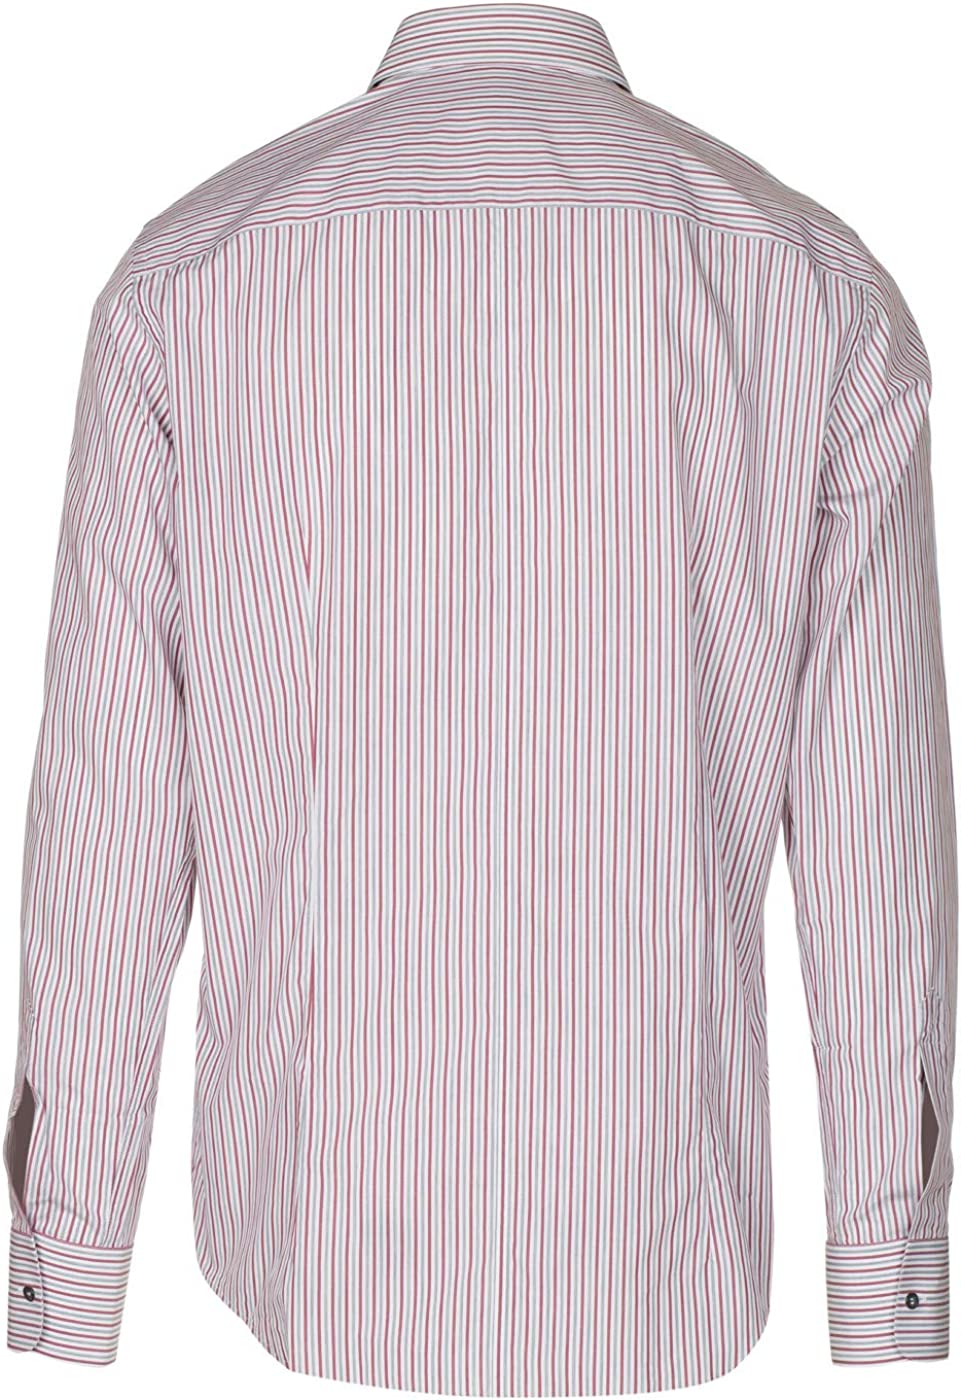 Shirts - COUTUREPOINT